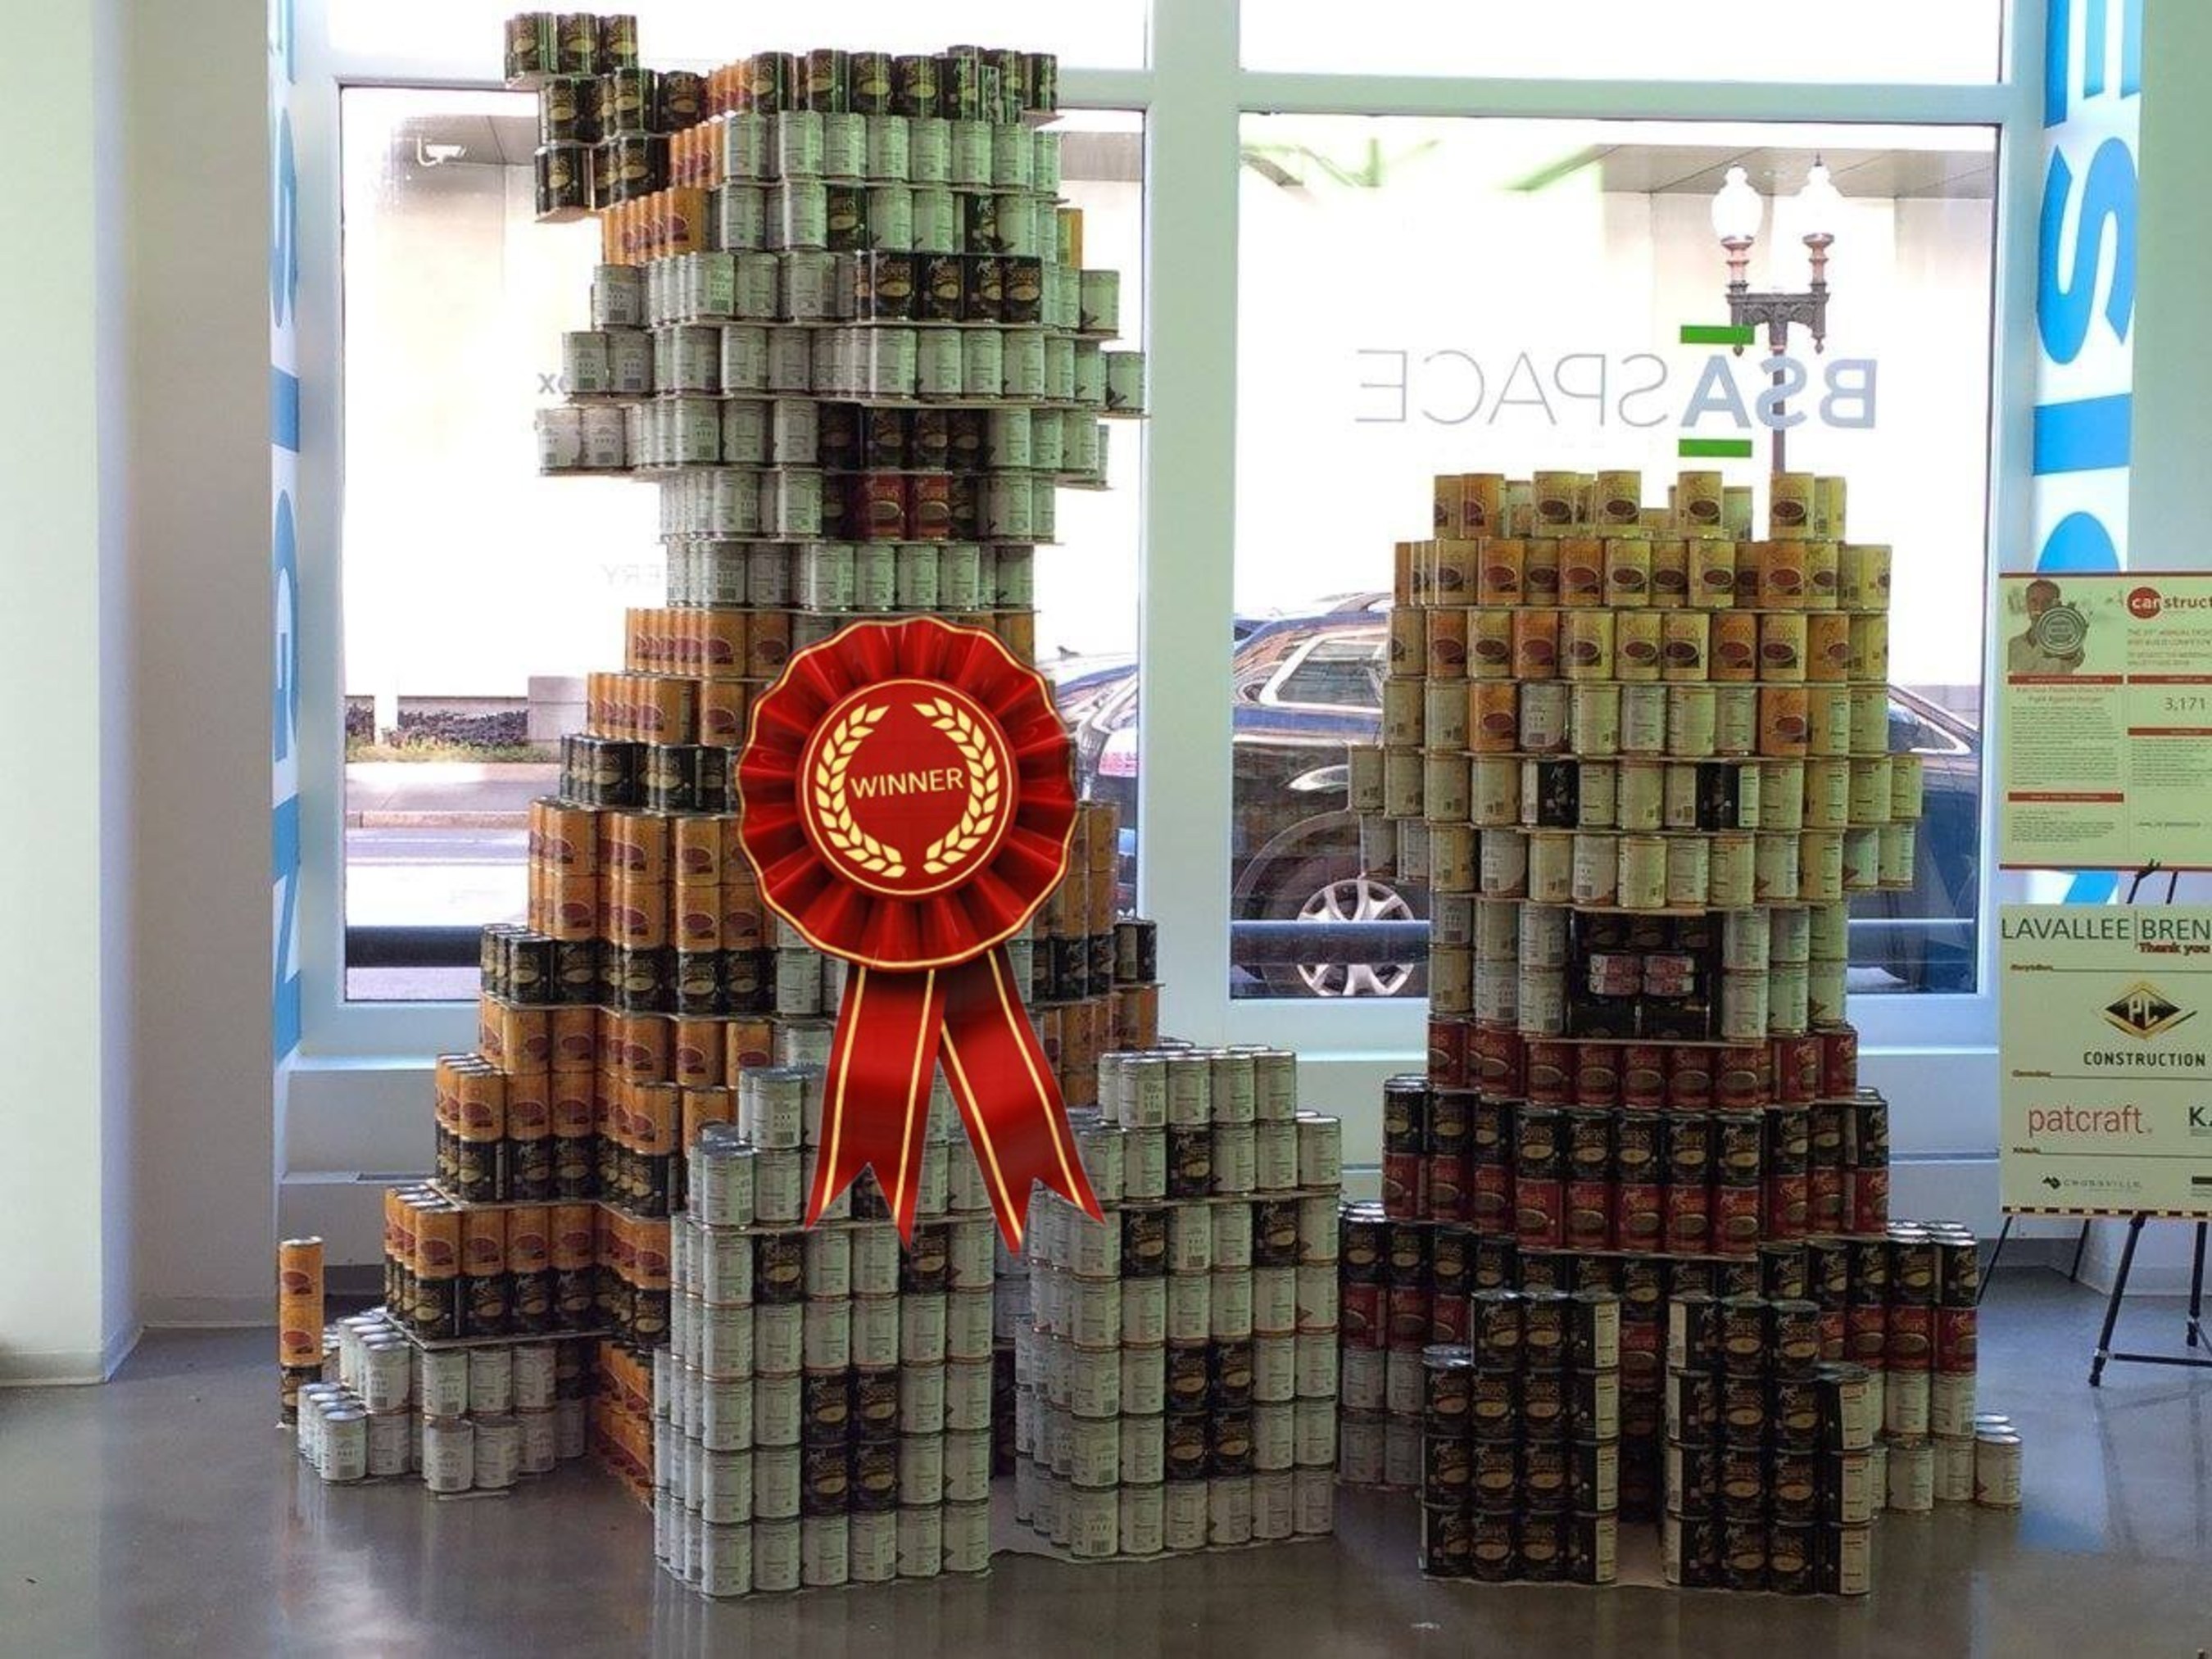 Lavallee Brensinger awarded People's Choice at 2015 Boston CANstruction